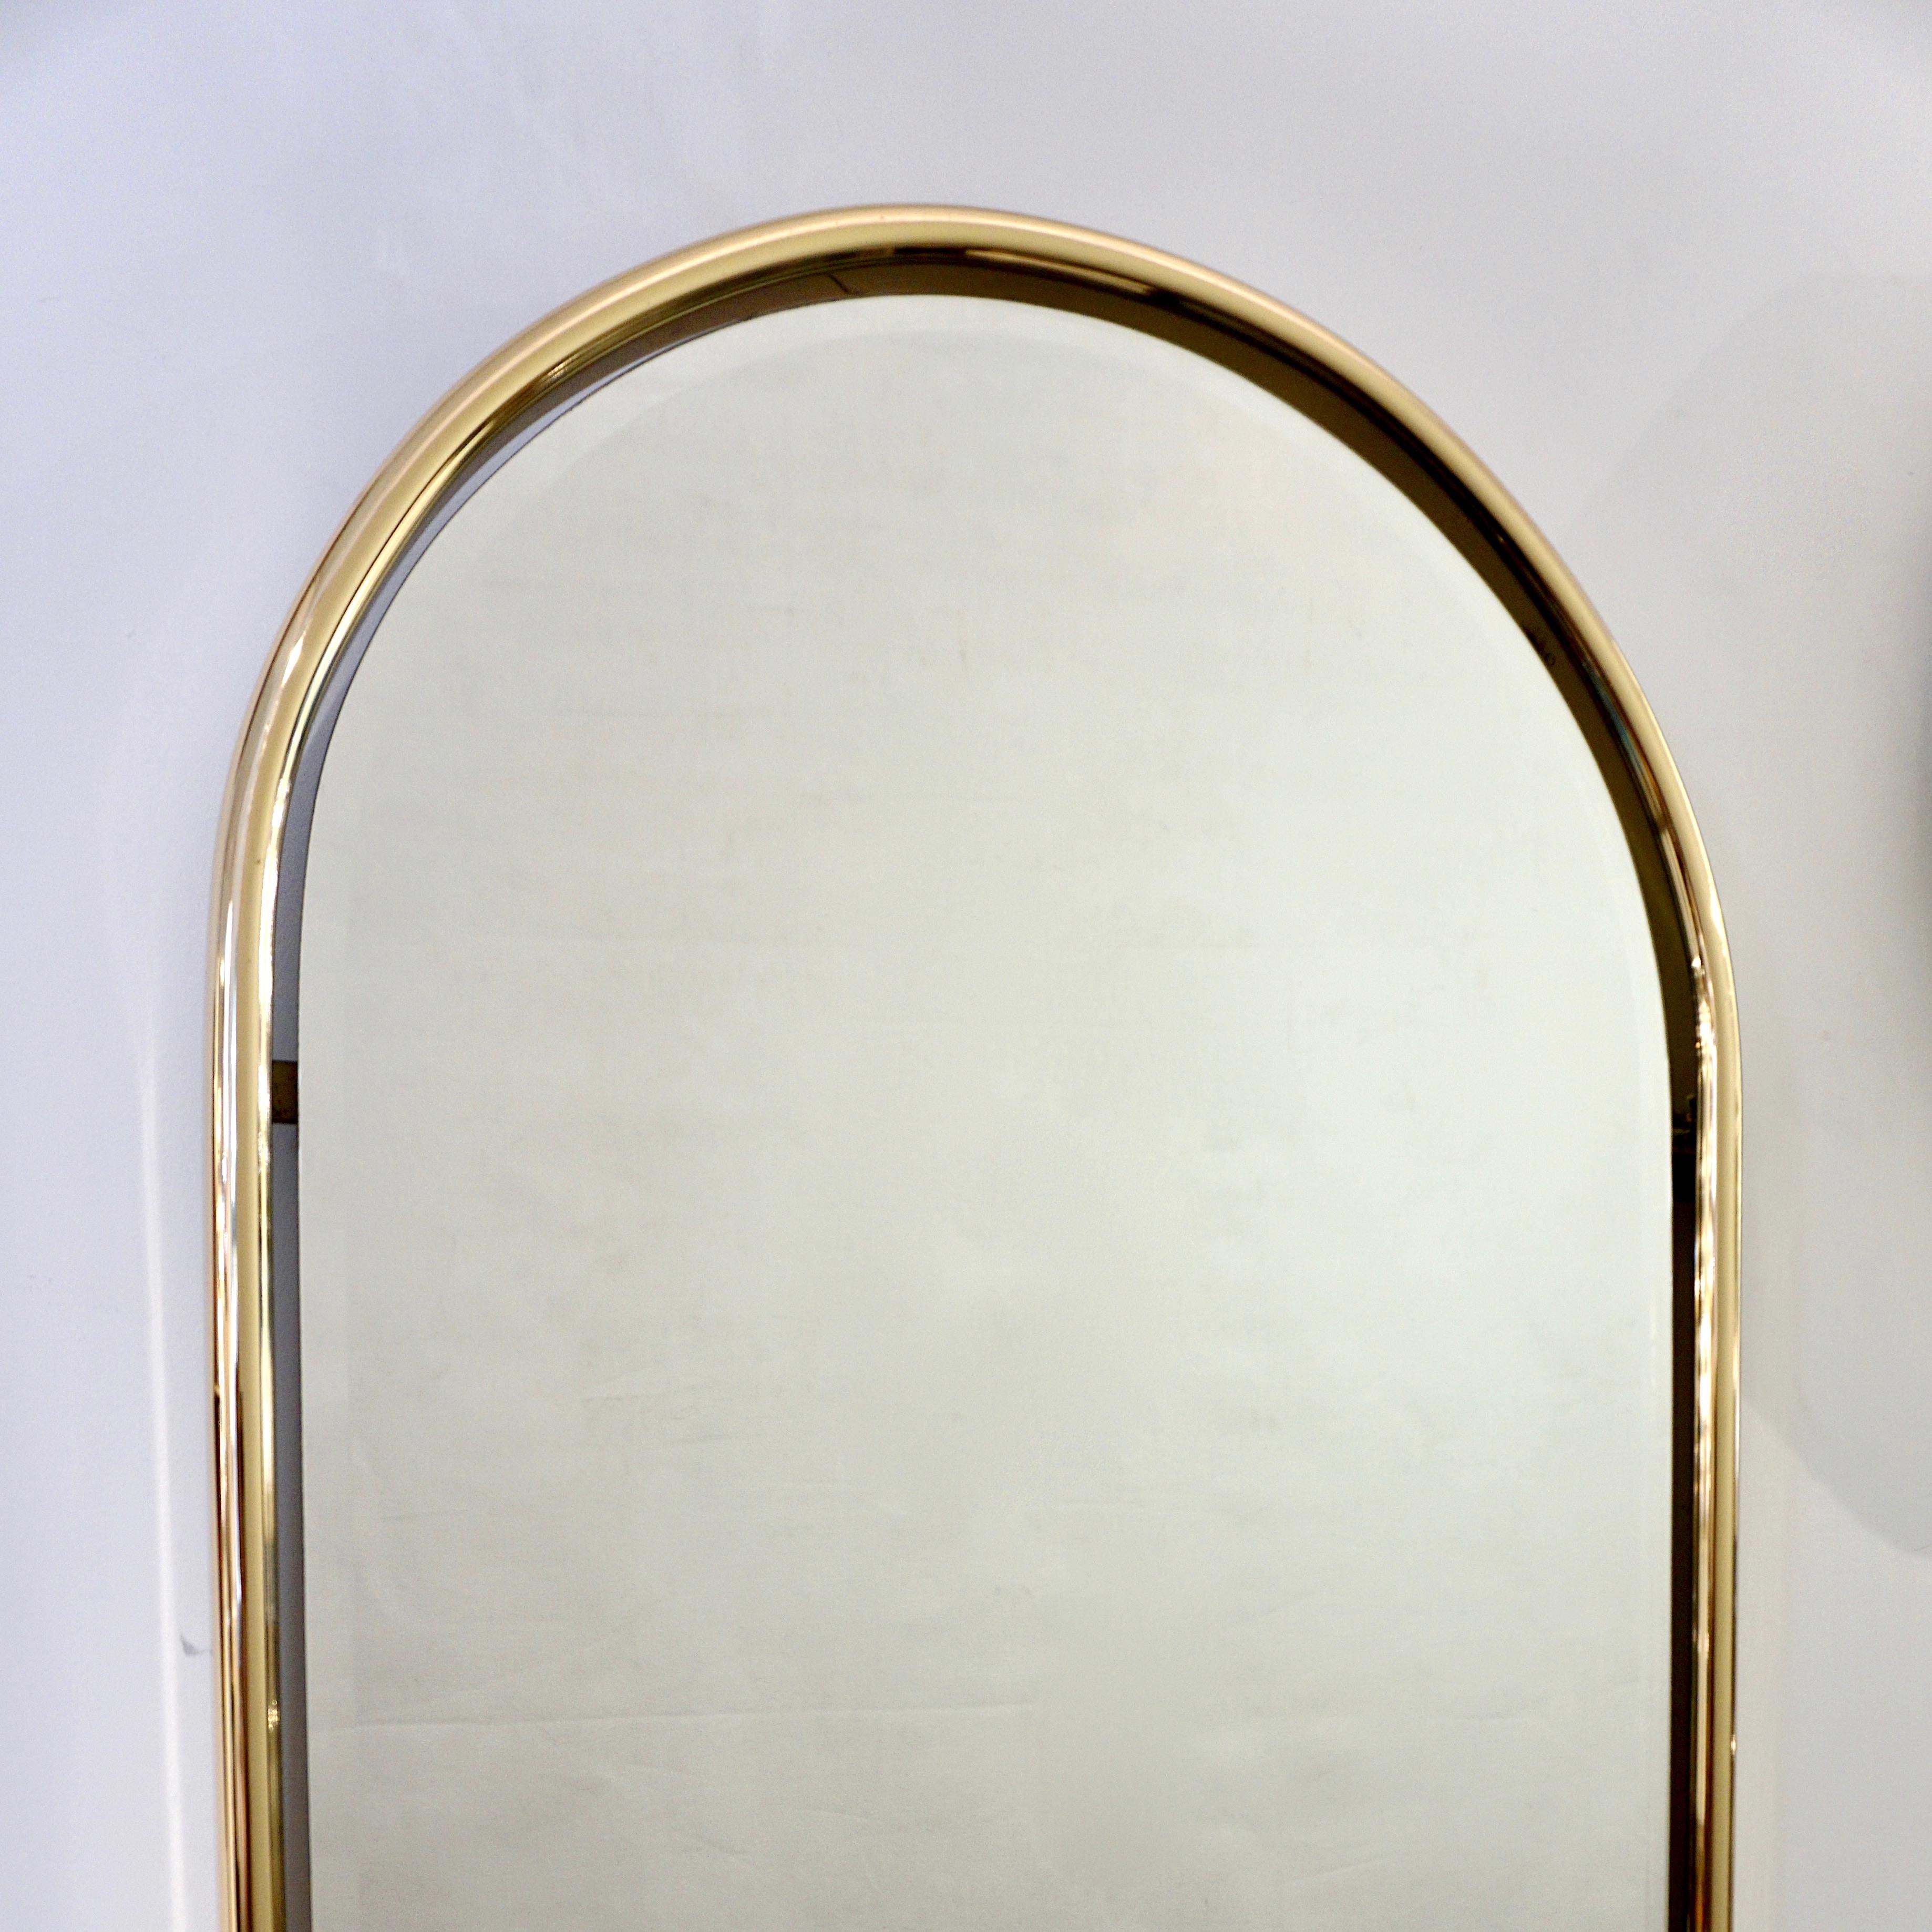 3 available - Handcrafted Italian vintage Art Deco design mirror with an elegant rounded top brass frame enclosing a detached mirror creating a floating effect.
The mirror plate ends in a sophisticated beveled rounded edge, multiplying the